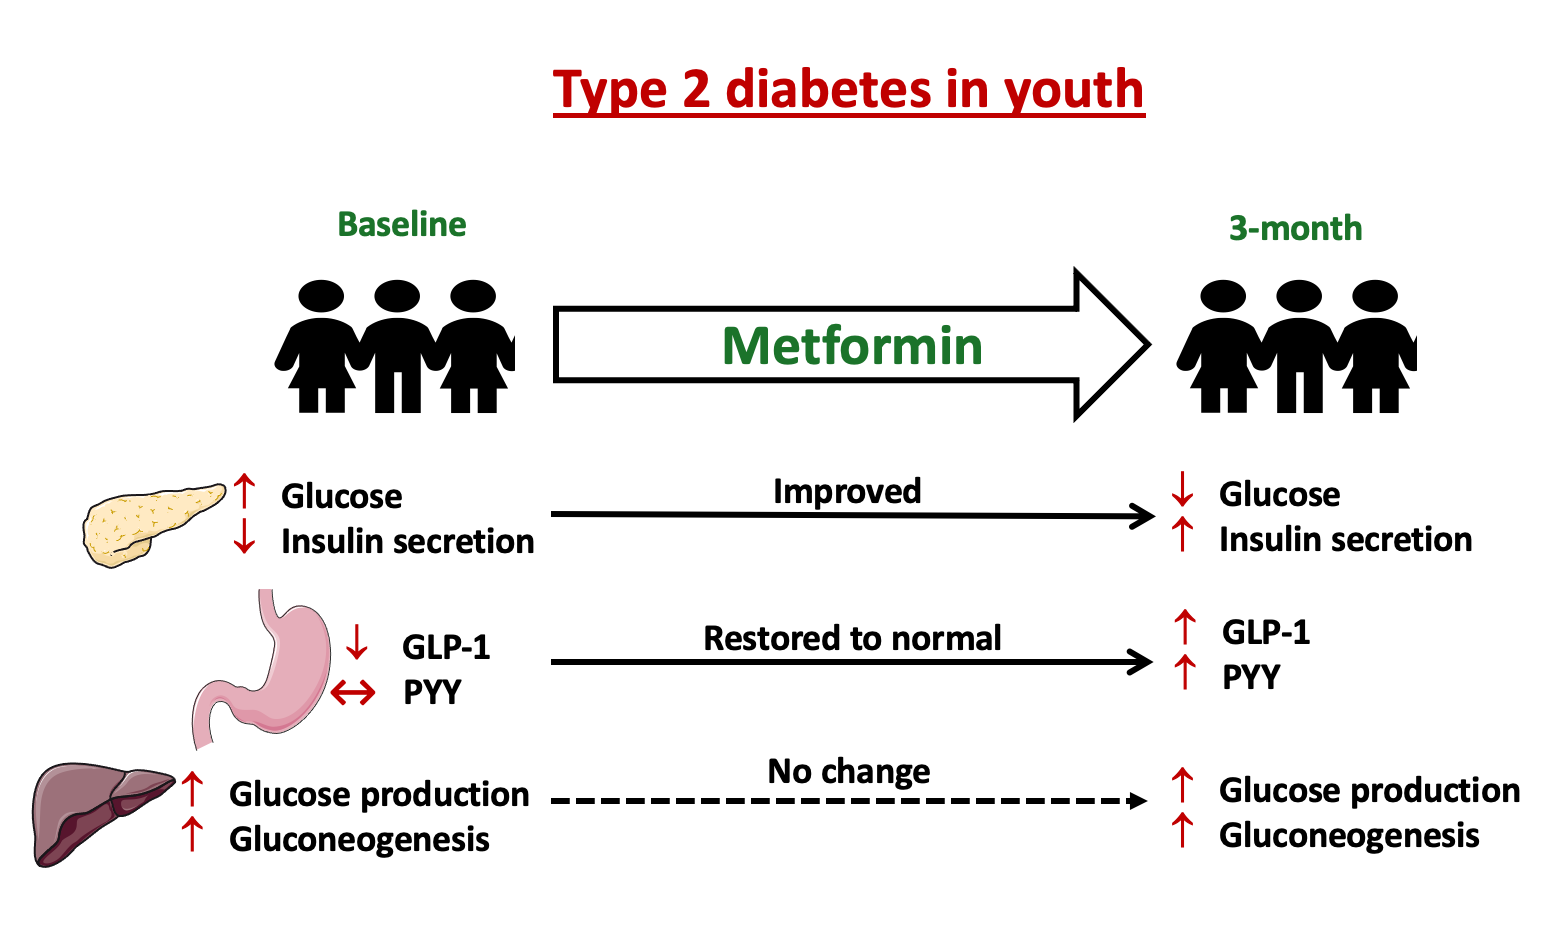 A diagram showing factors of type 2 diabetes in youth